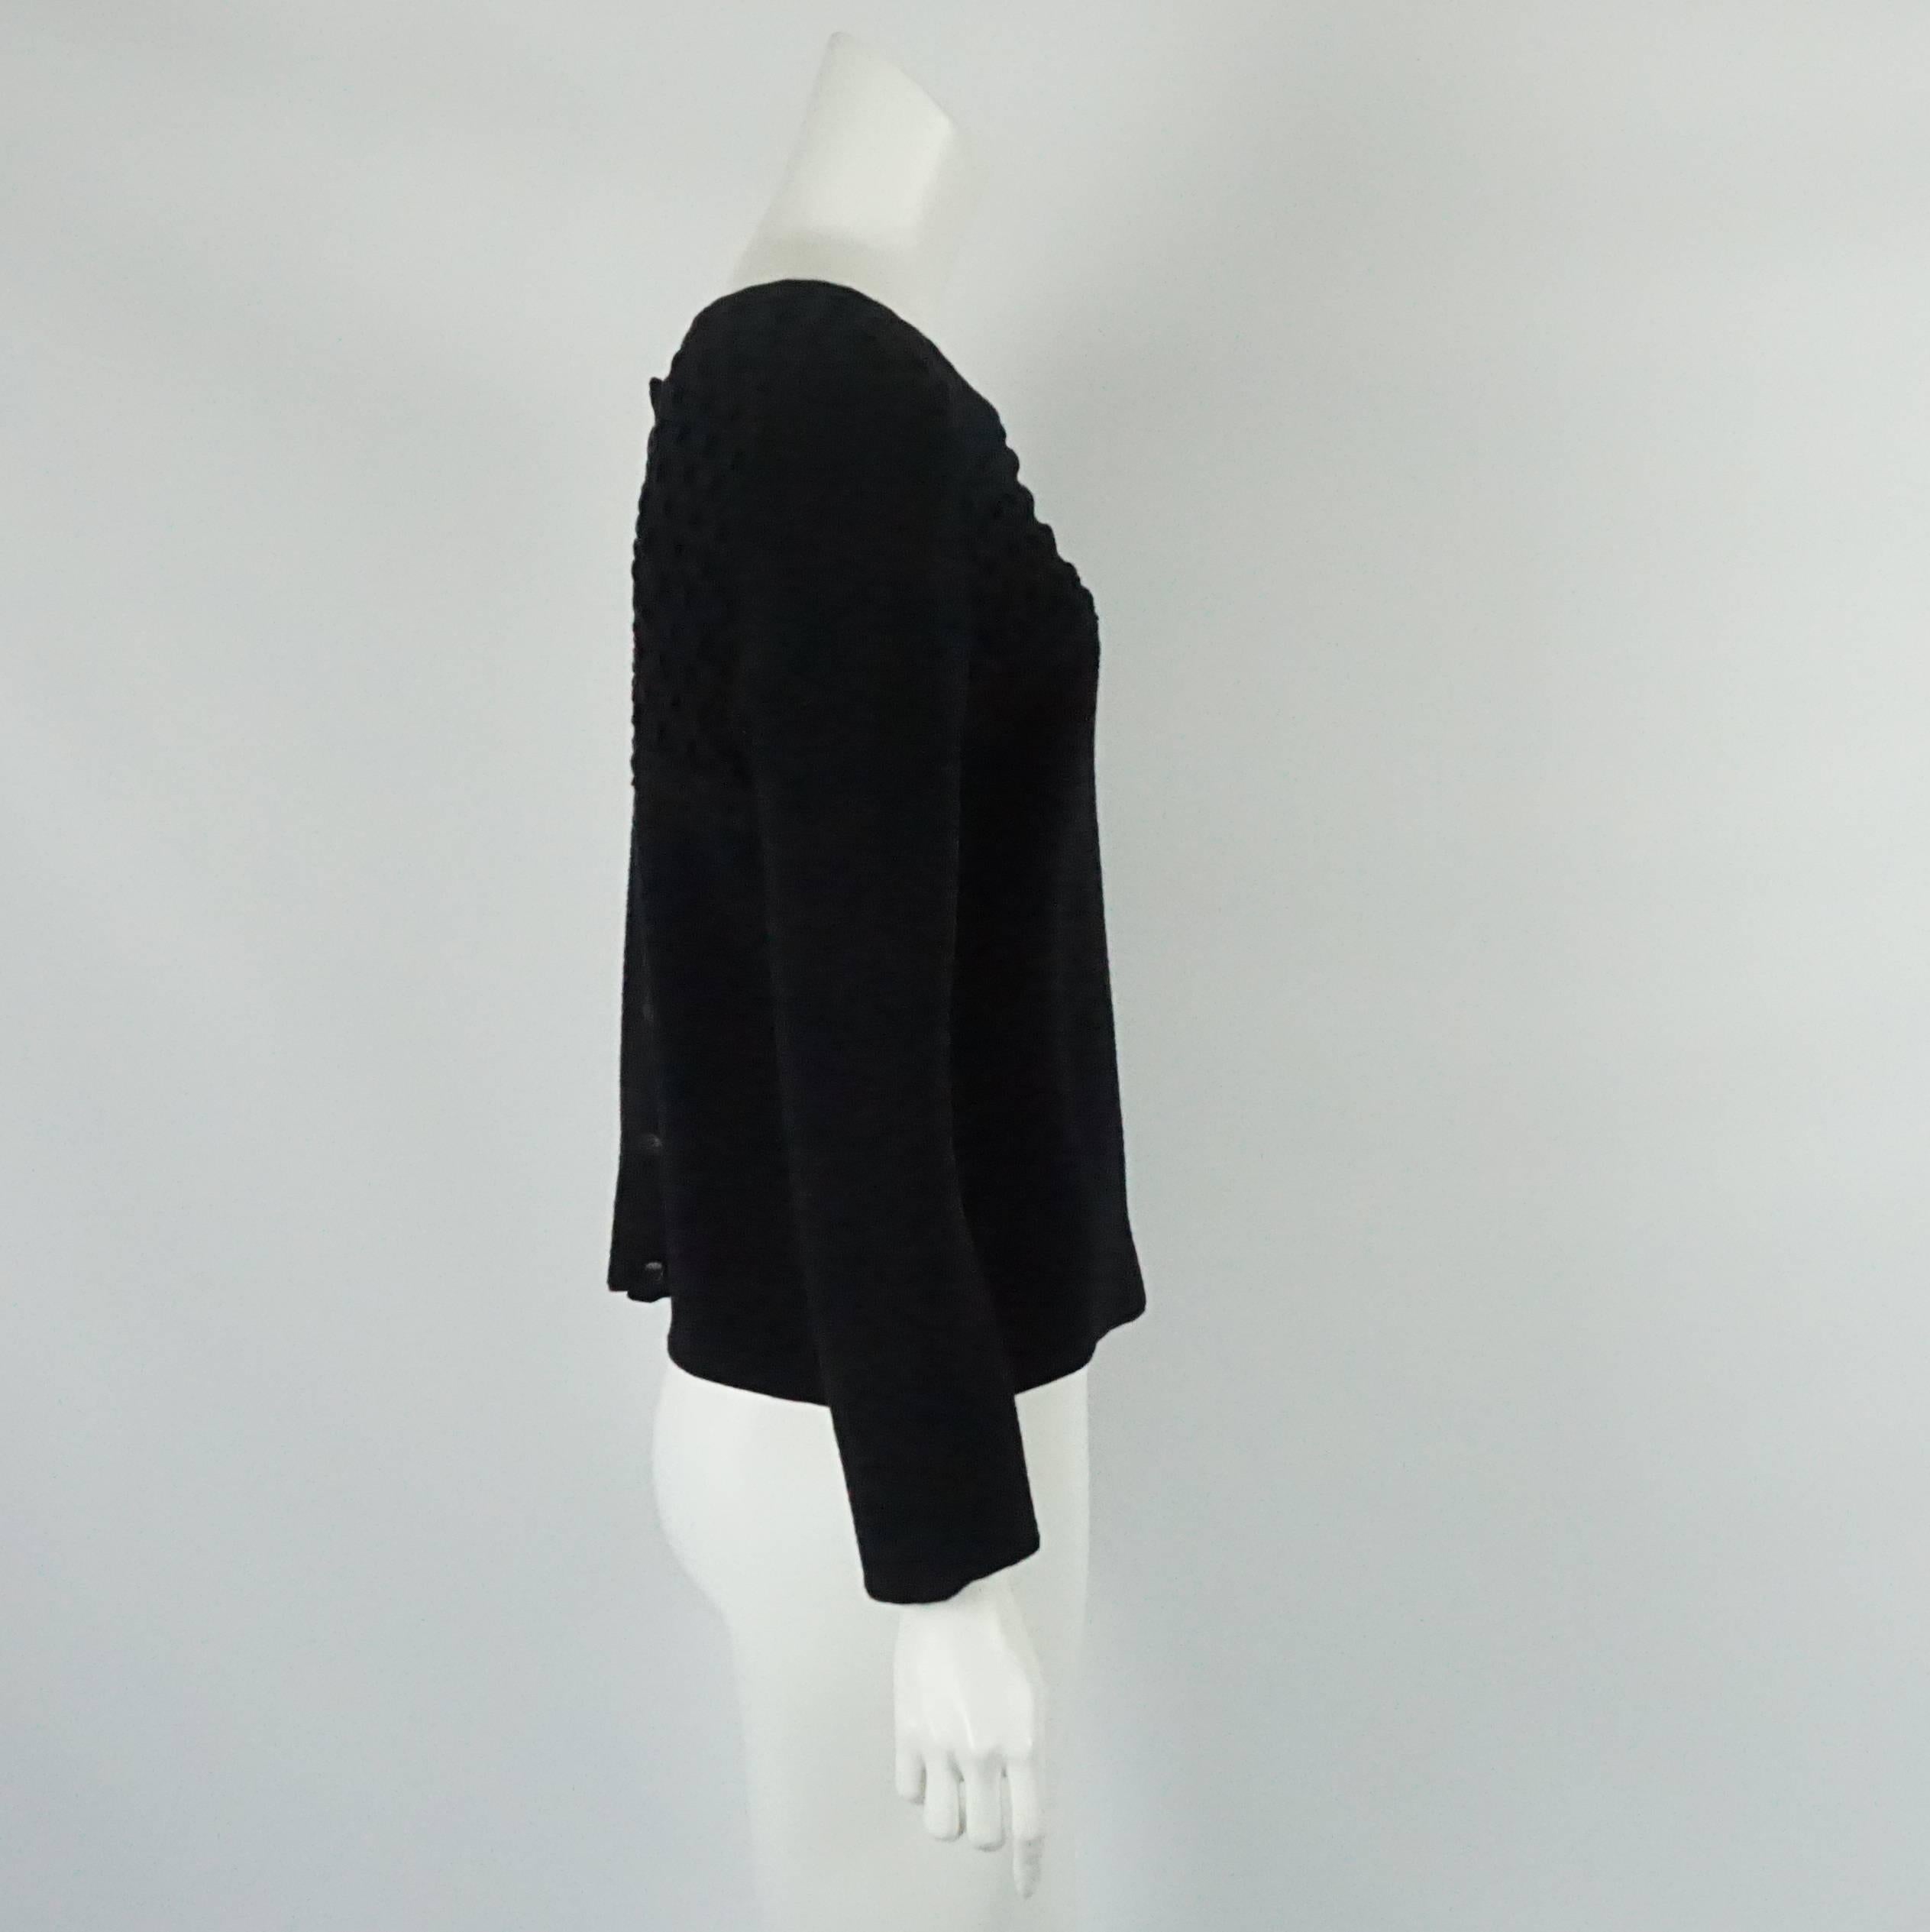 Chanel Black Wool Blend Ribbed Sweater Top - 40. This sweater is a beautiful piece for the cold weather. It is a wool, rayon, and camel hair blend and is in excellent condition with light wear. The sweater is fully ribbed with the neckline area